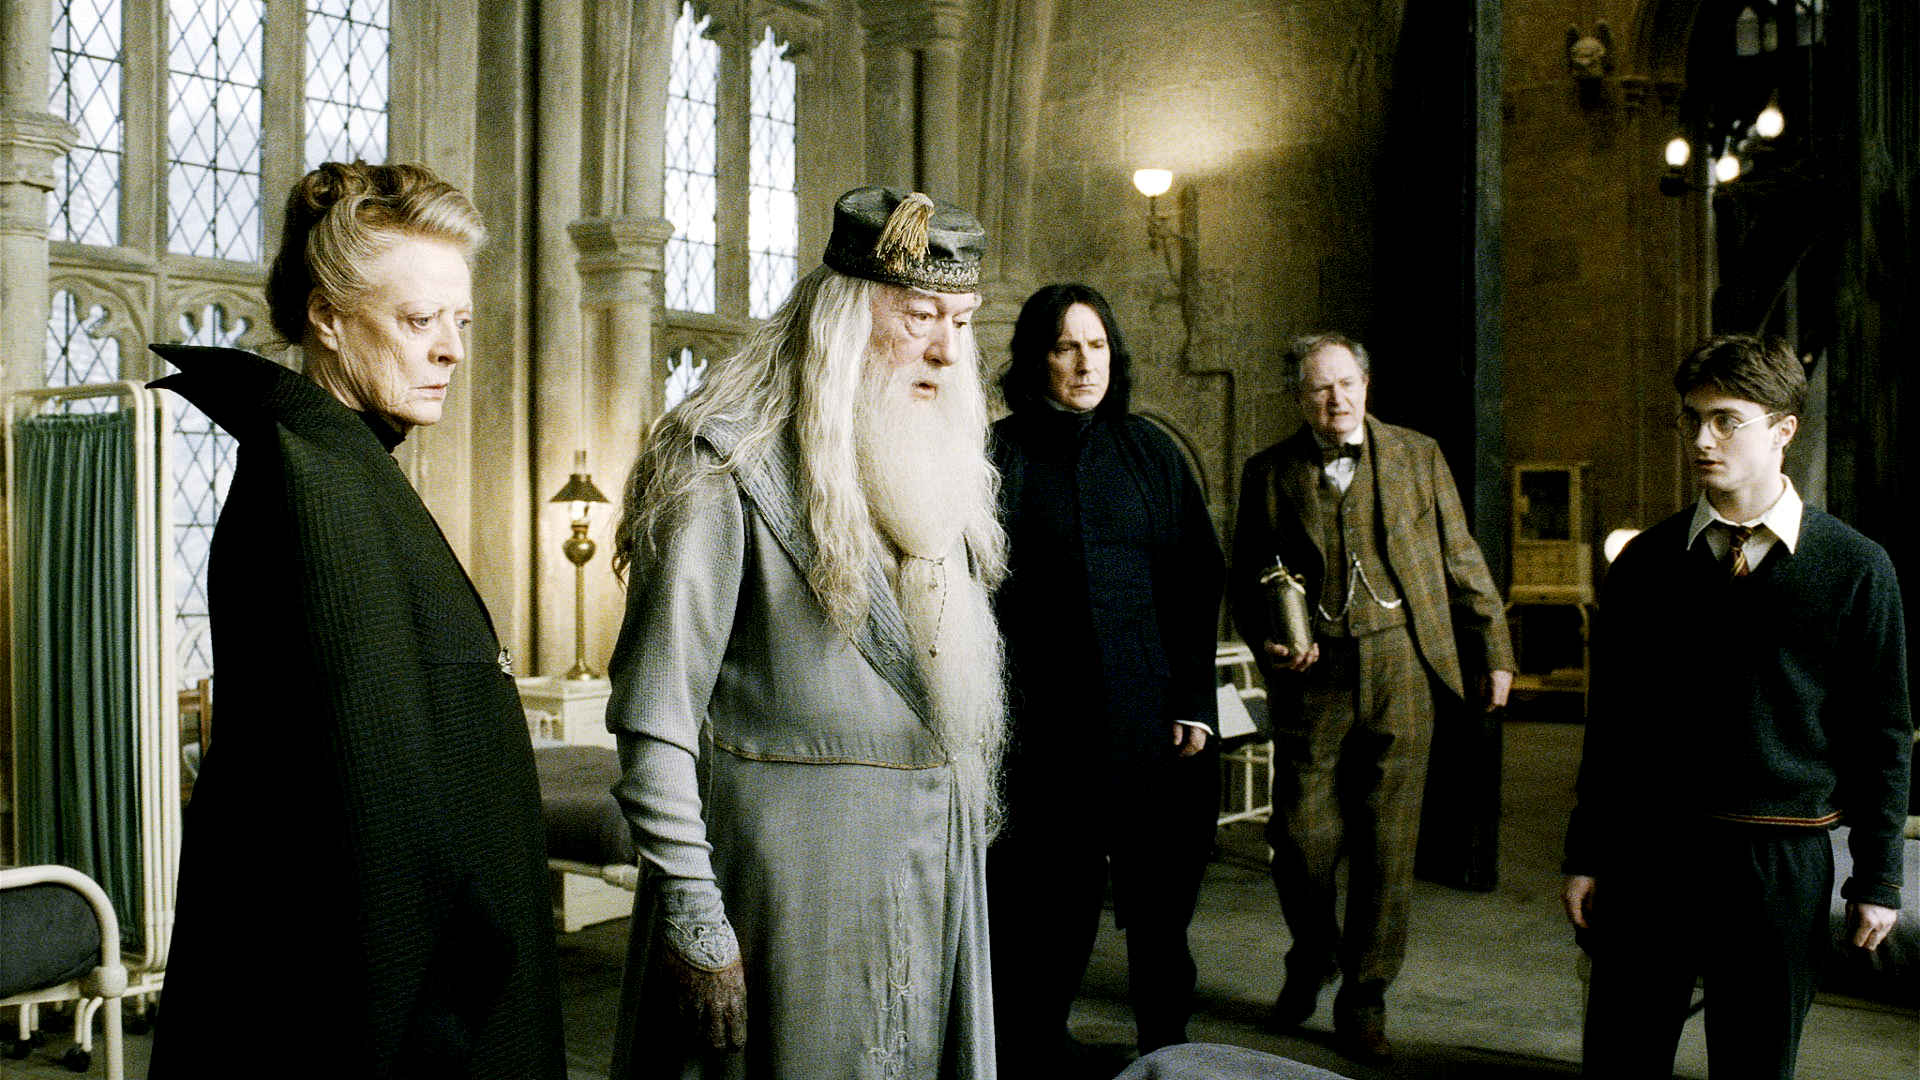 Maggie Smith, Michael Gambon, Alan Rickman, Jim Broadbent and Daniel Radcliffe in Warner Bros' Harry Potter and the Half-Blood Prince (2009)